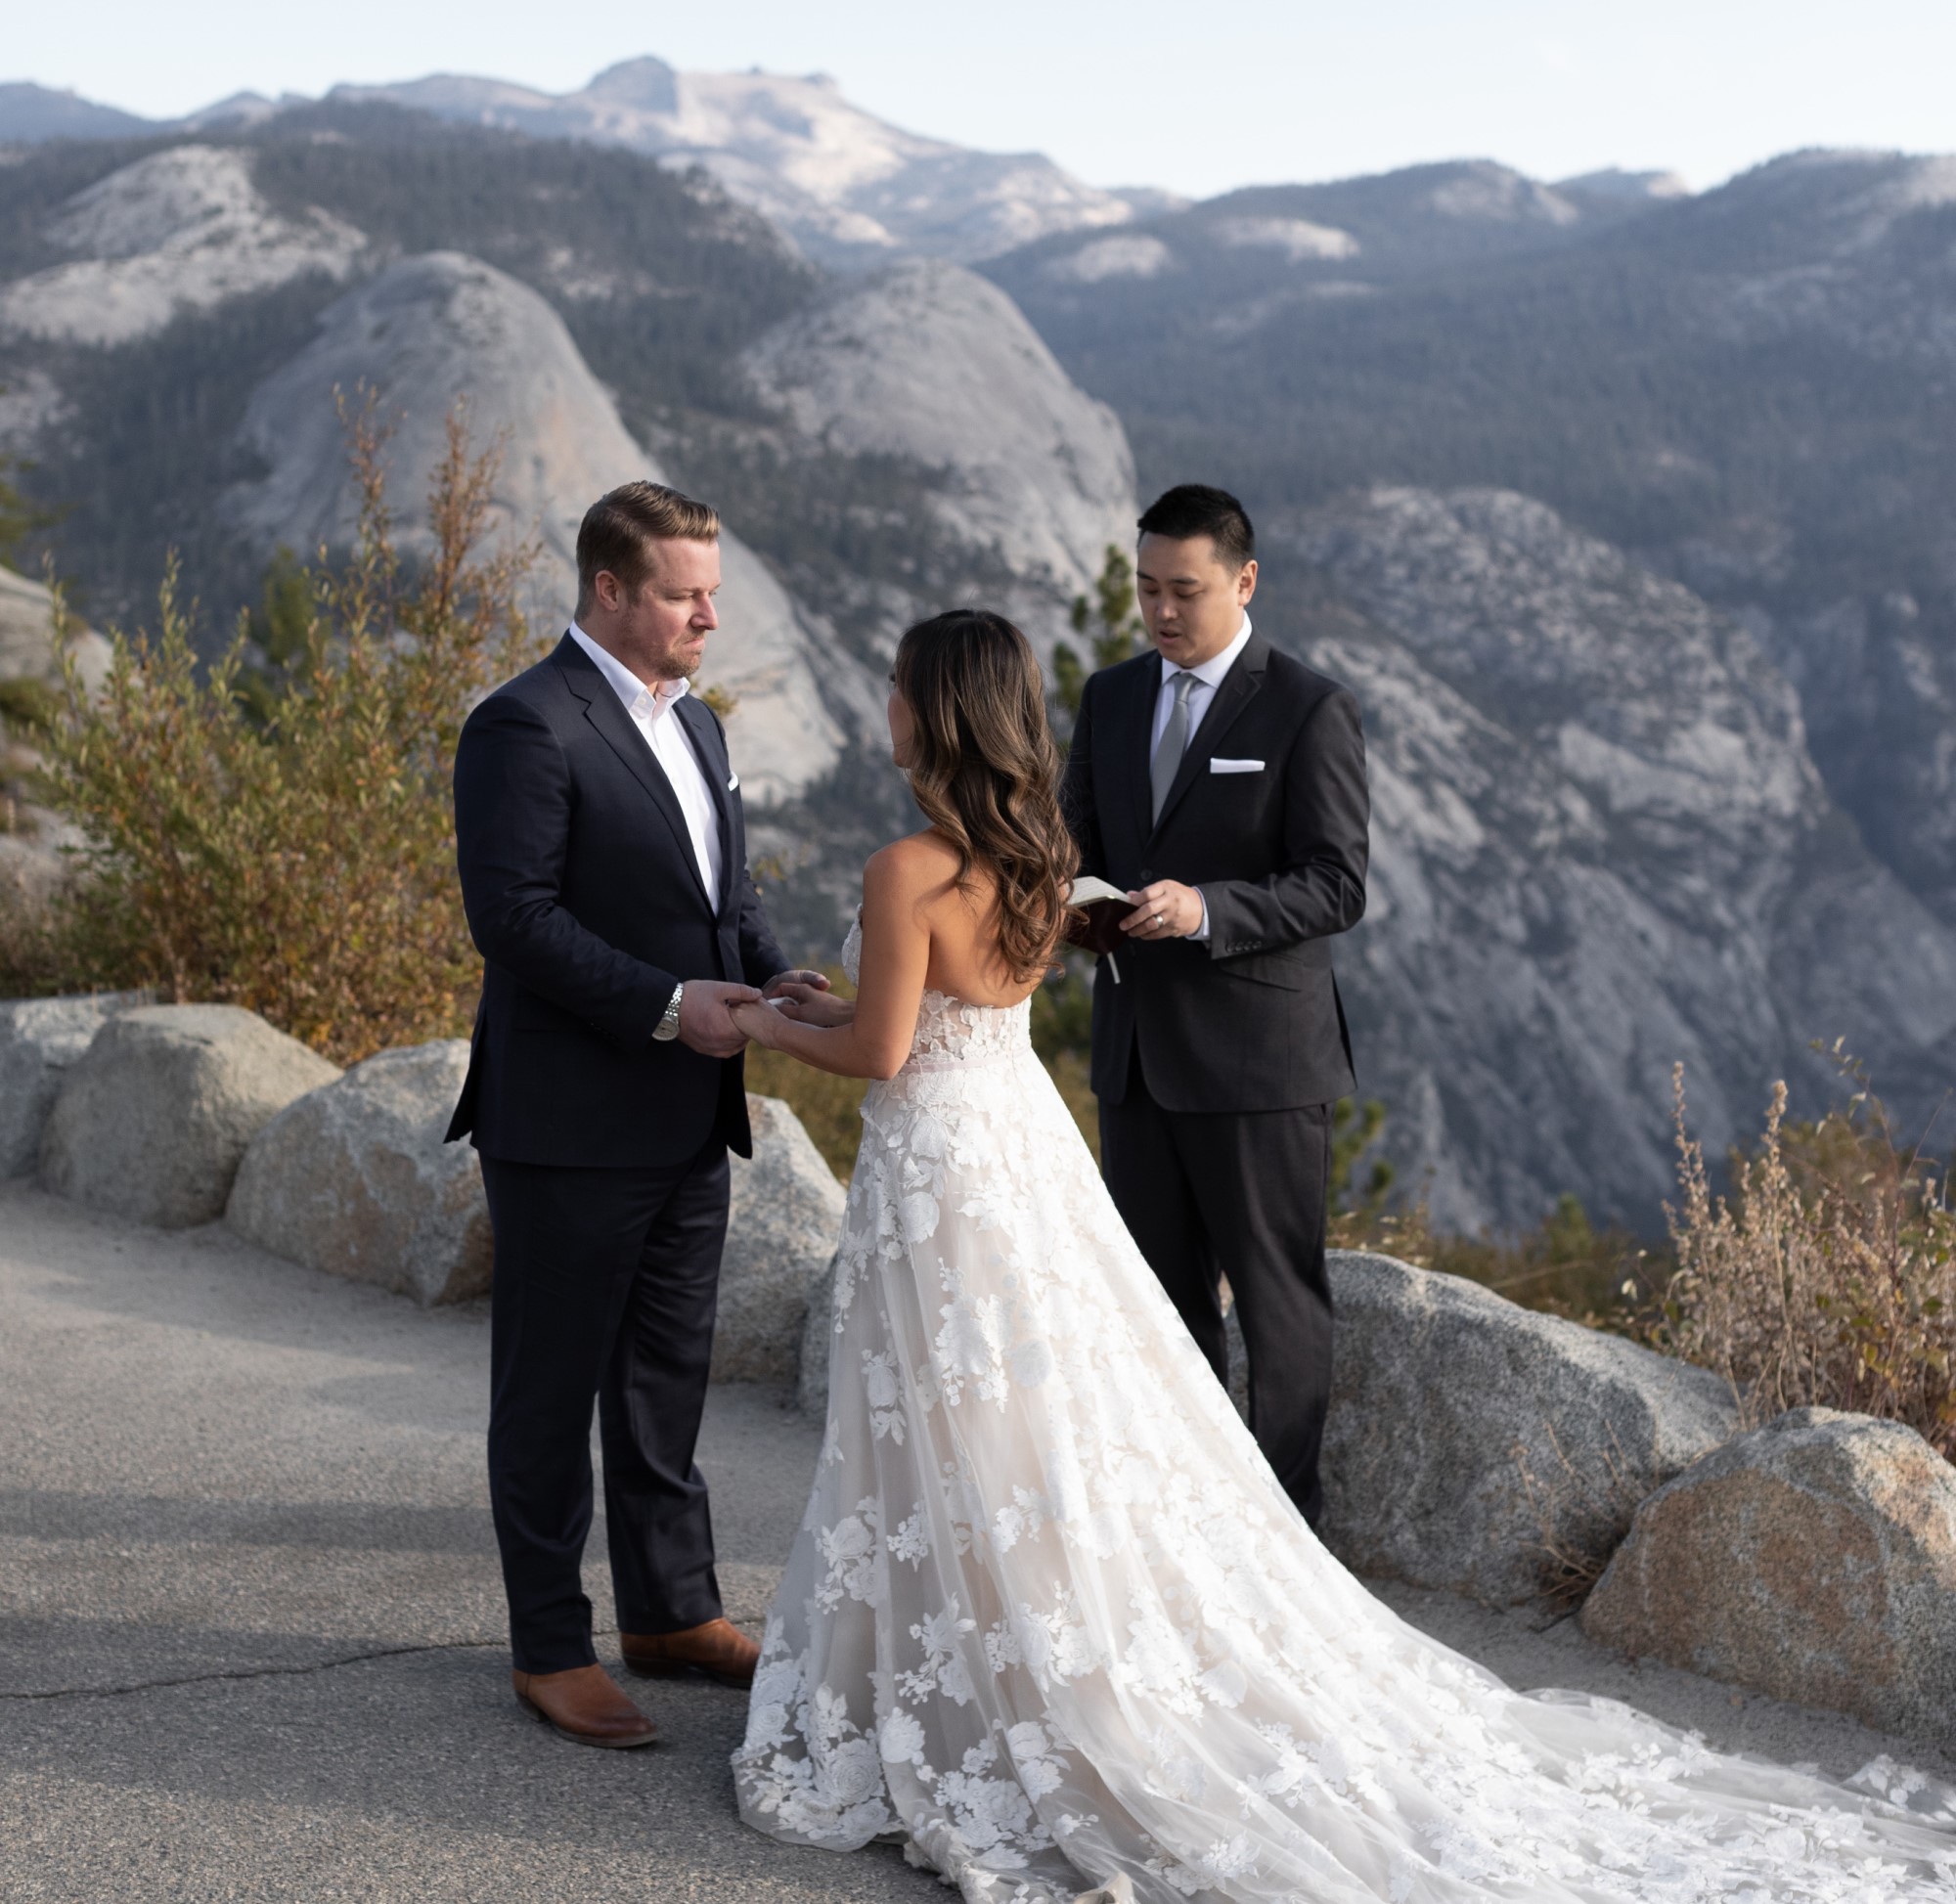 Bride, groom and officiant in small wedding ceremony